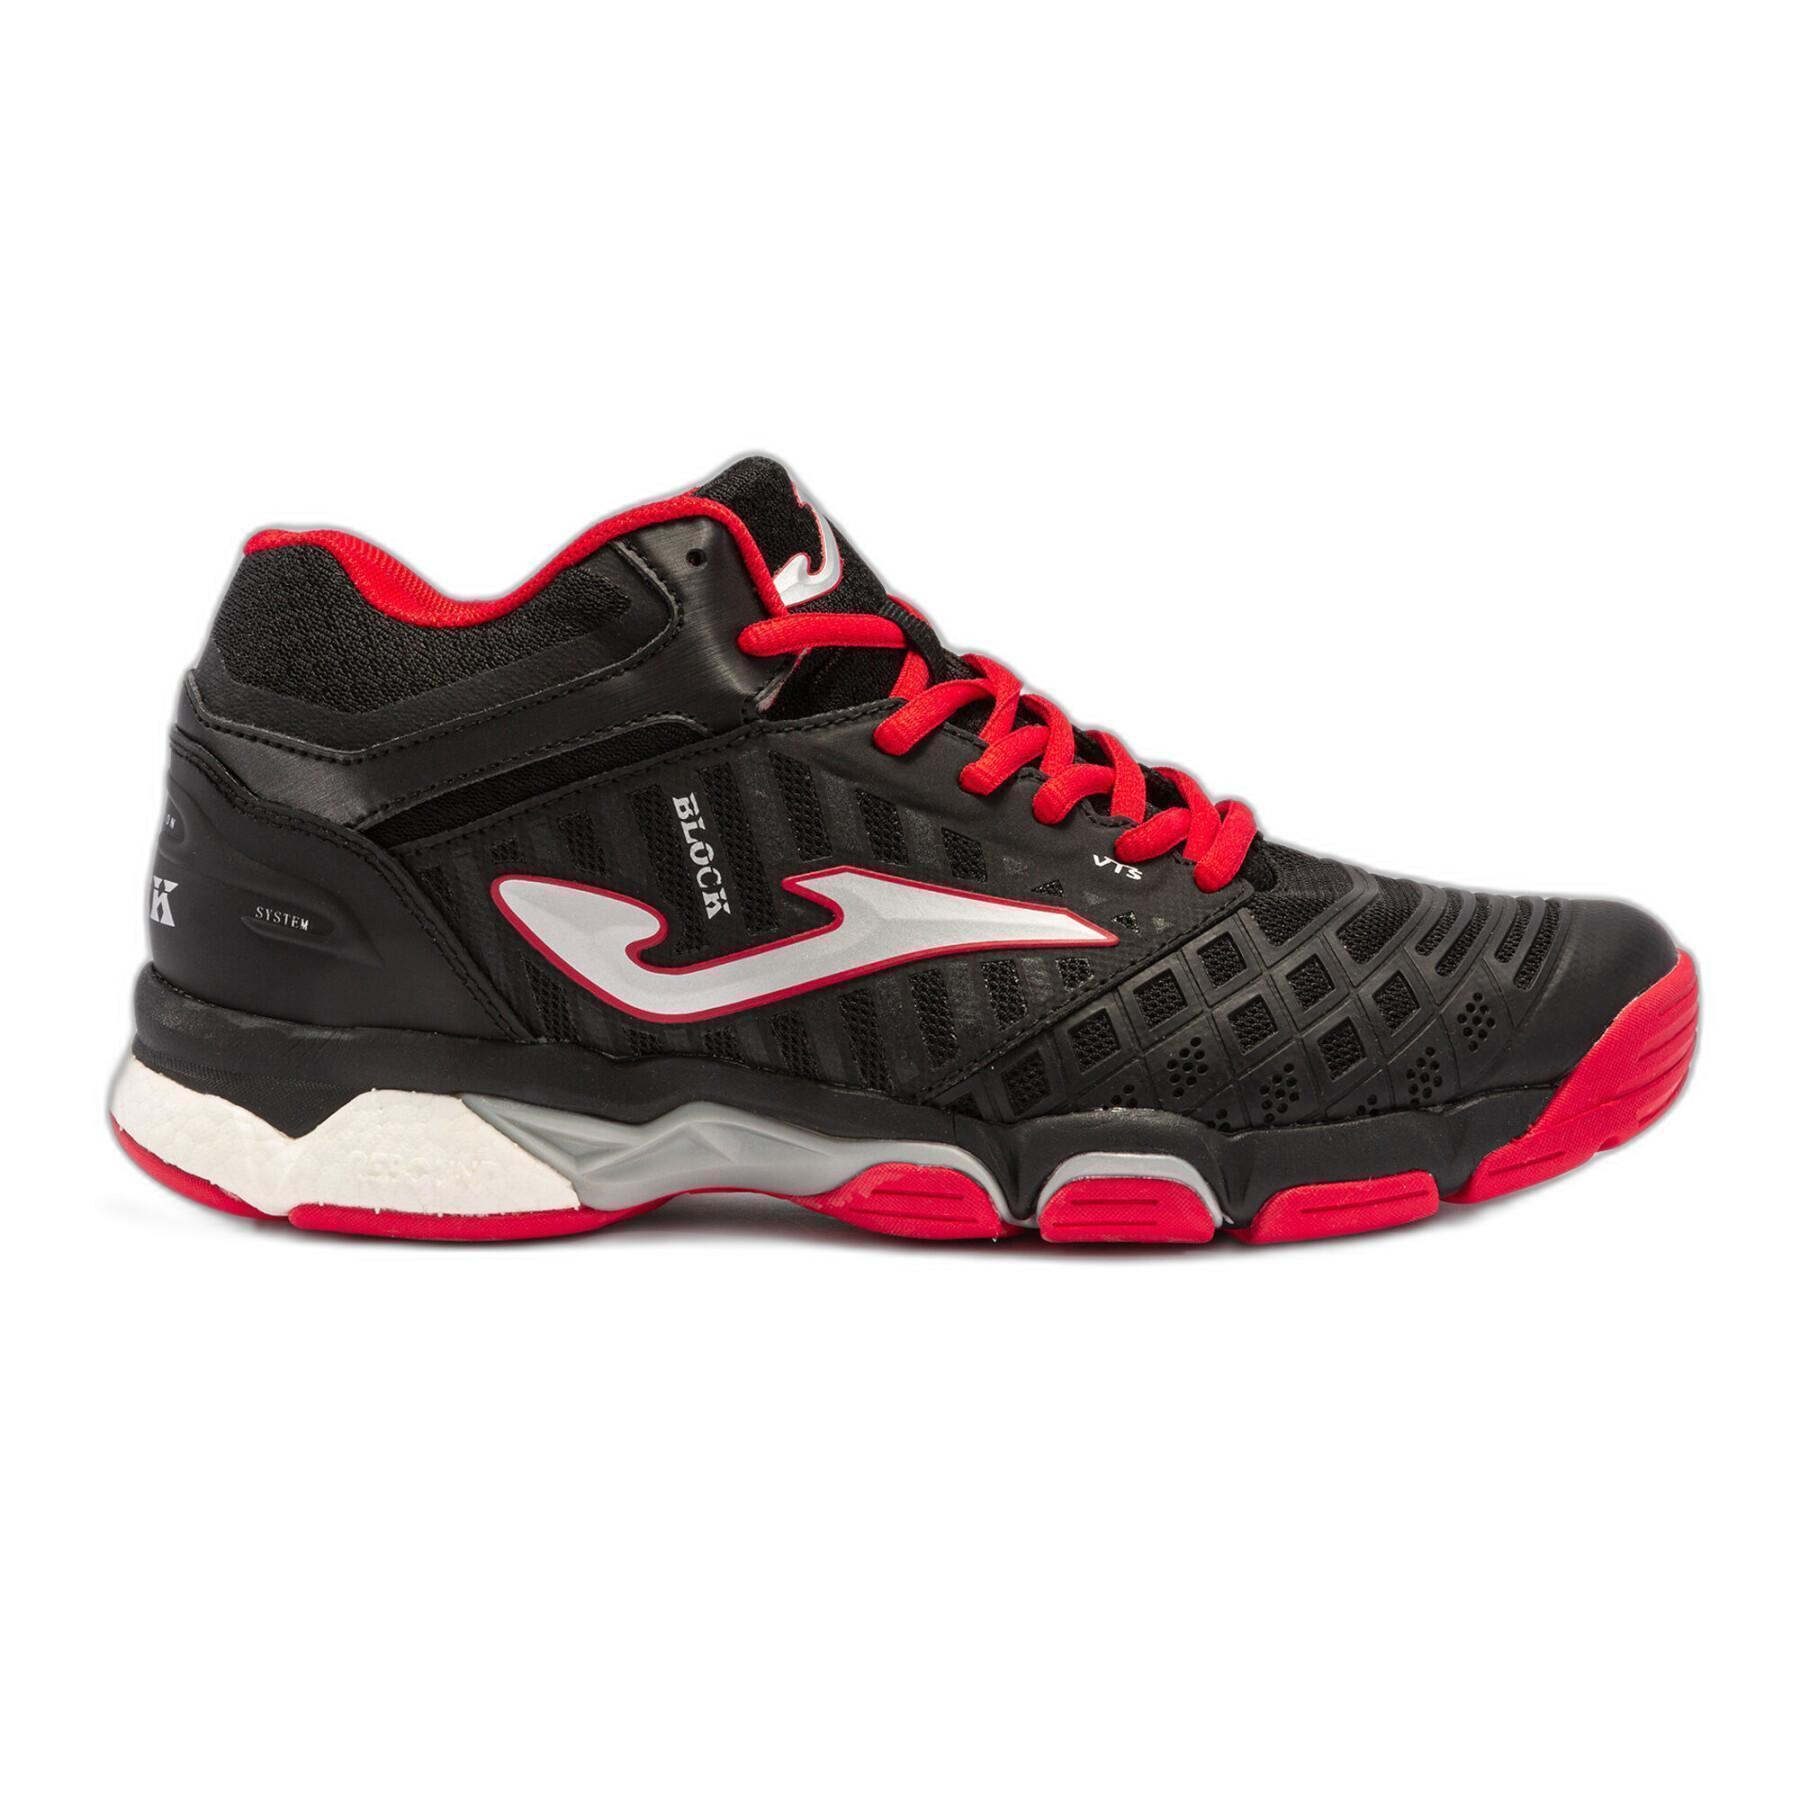 Volleyball shoes Joma V.Block 2301